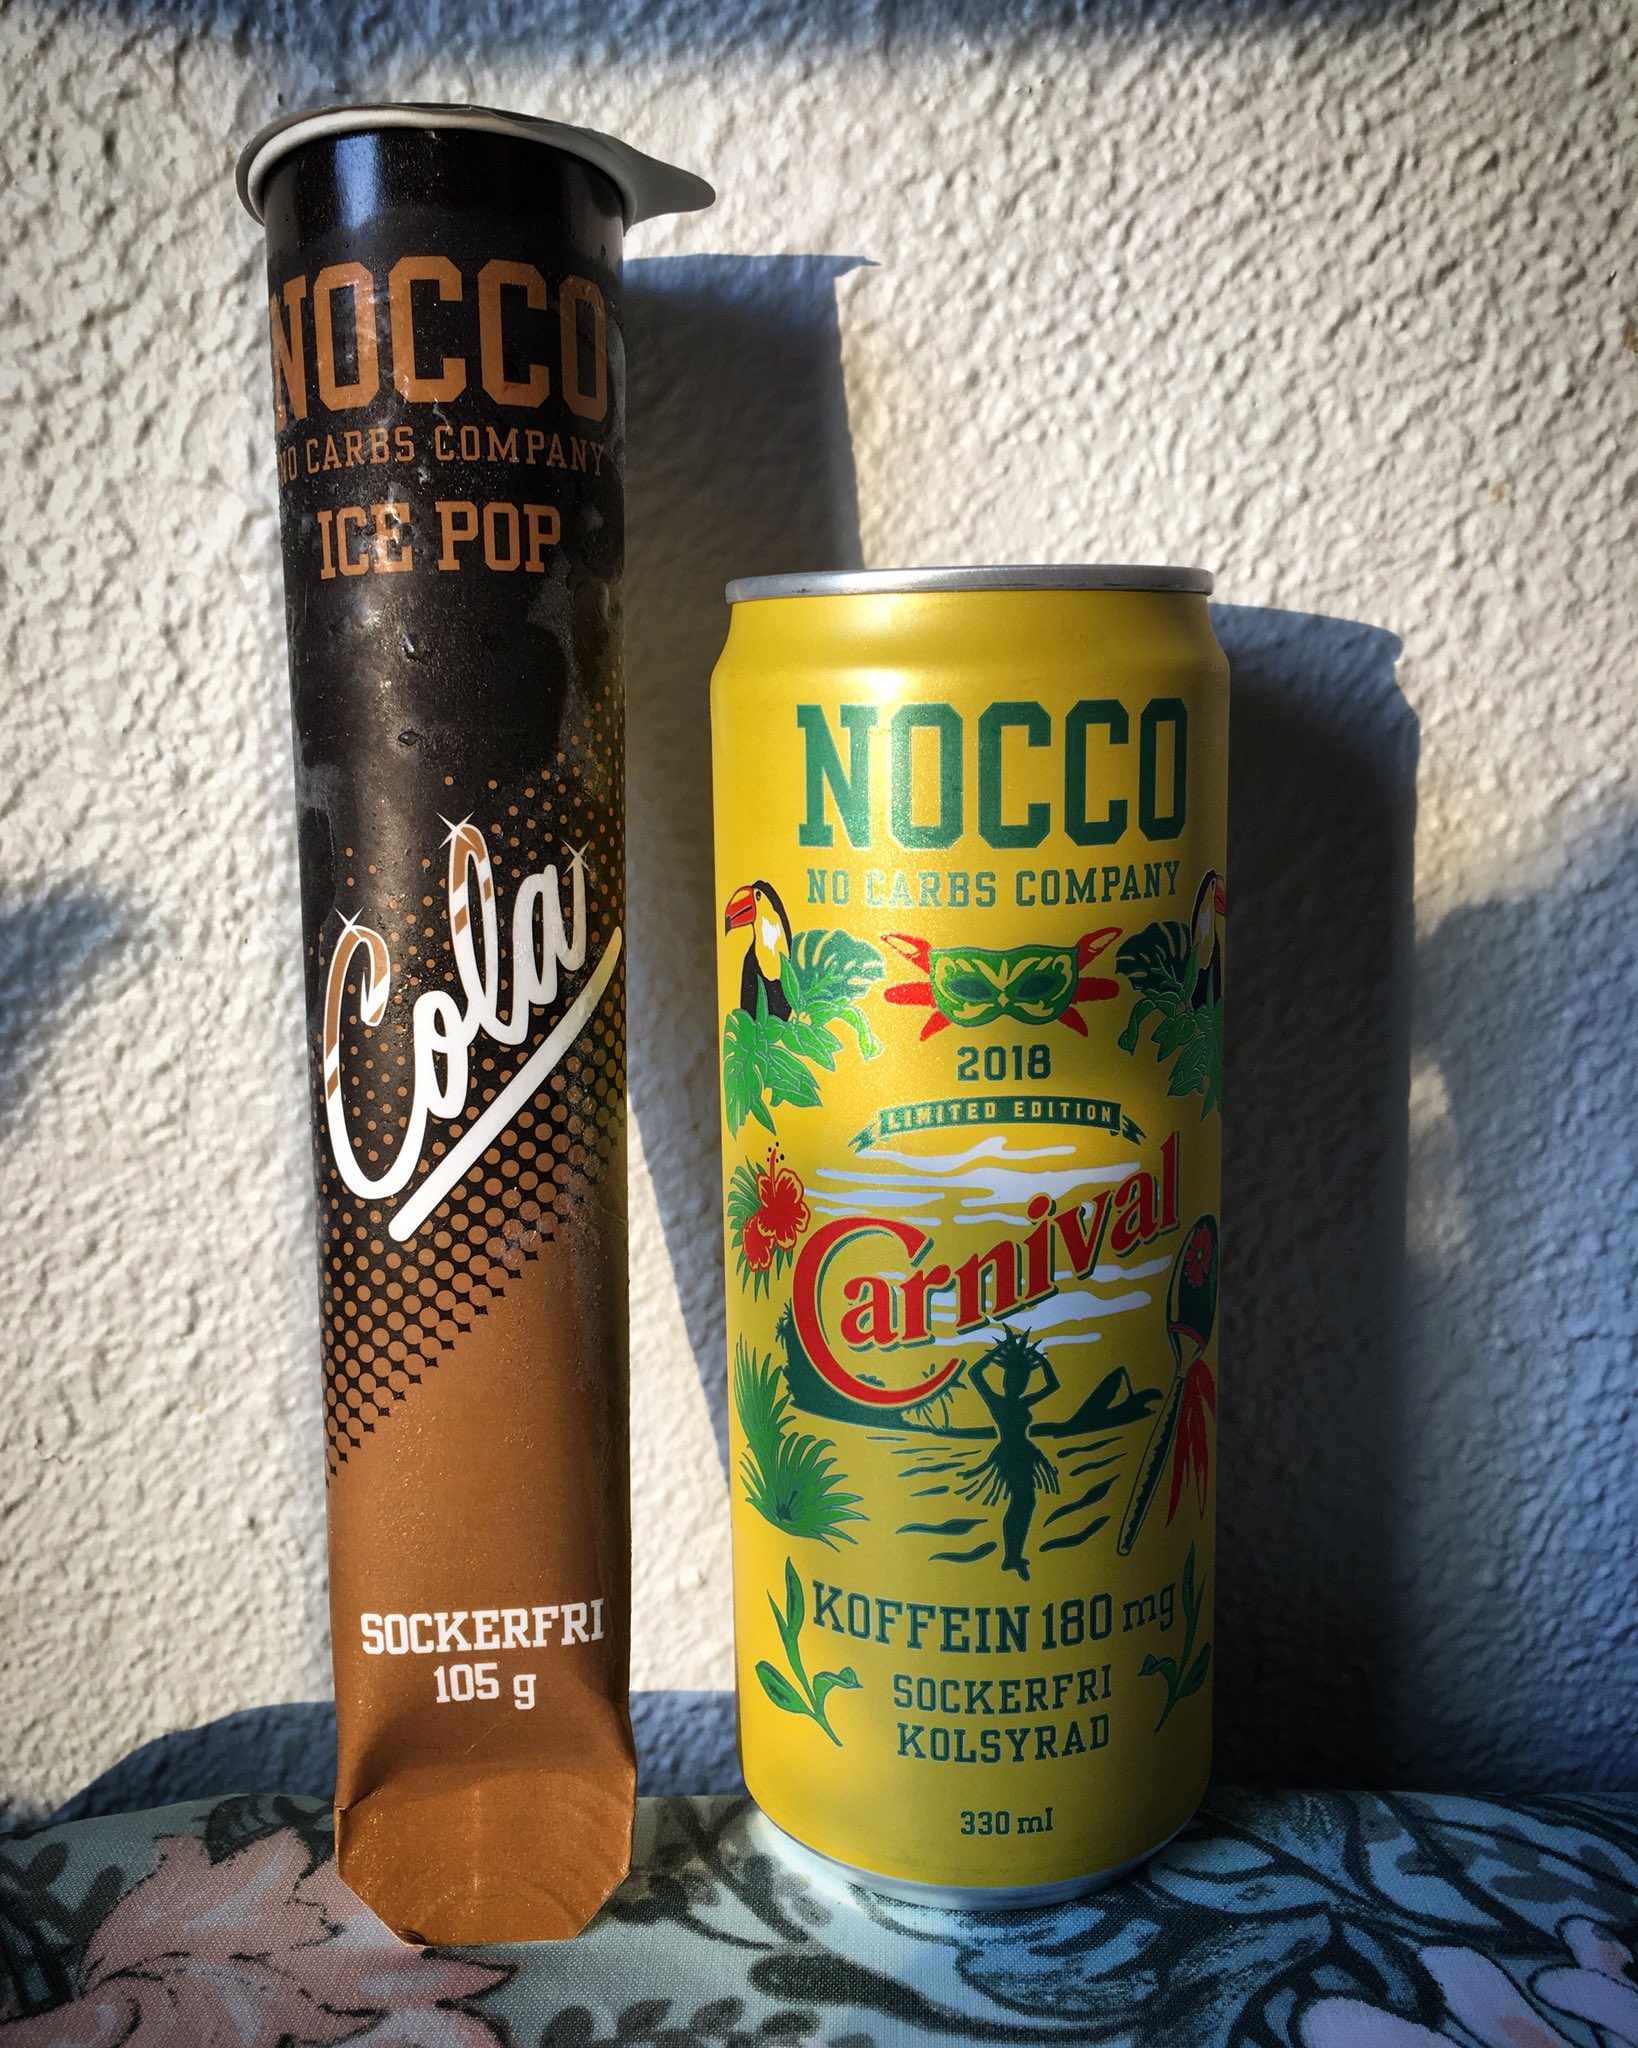 Klemme Alvorlig Kilauea Mountain 24XeRo.exe on Twitter: "I bought the new Nocco Carnival and Nocco Ice Pop  Cola. Summer starts now! ☀️ #NOCCO #NoccoCarnival #NoccoIcePop  #NoccoSummerStartsNow #Nocco2018 https://t.co/XycPbGeRDp  https://t.co/42f6nHJCqC" / Twitter